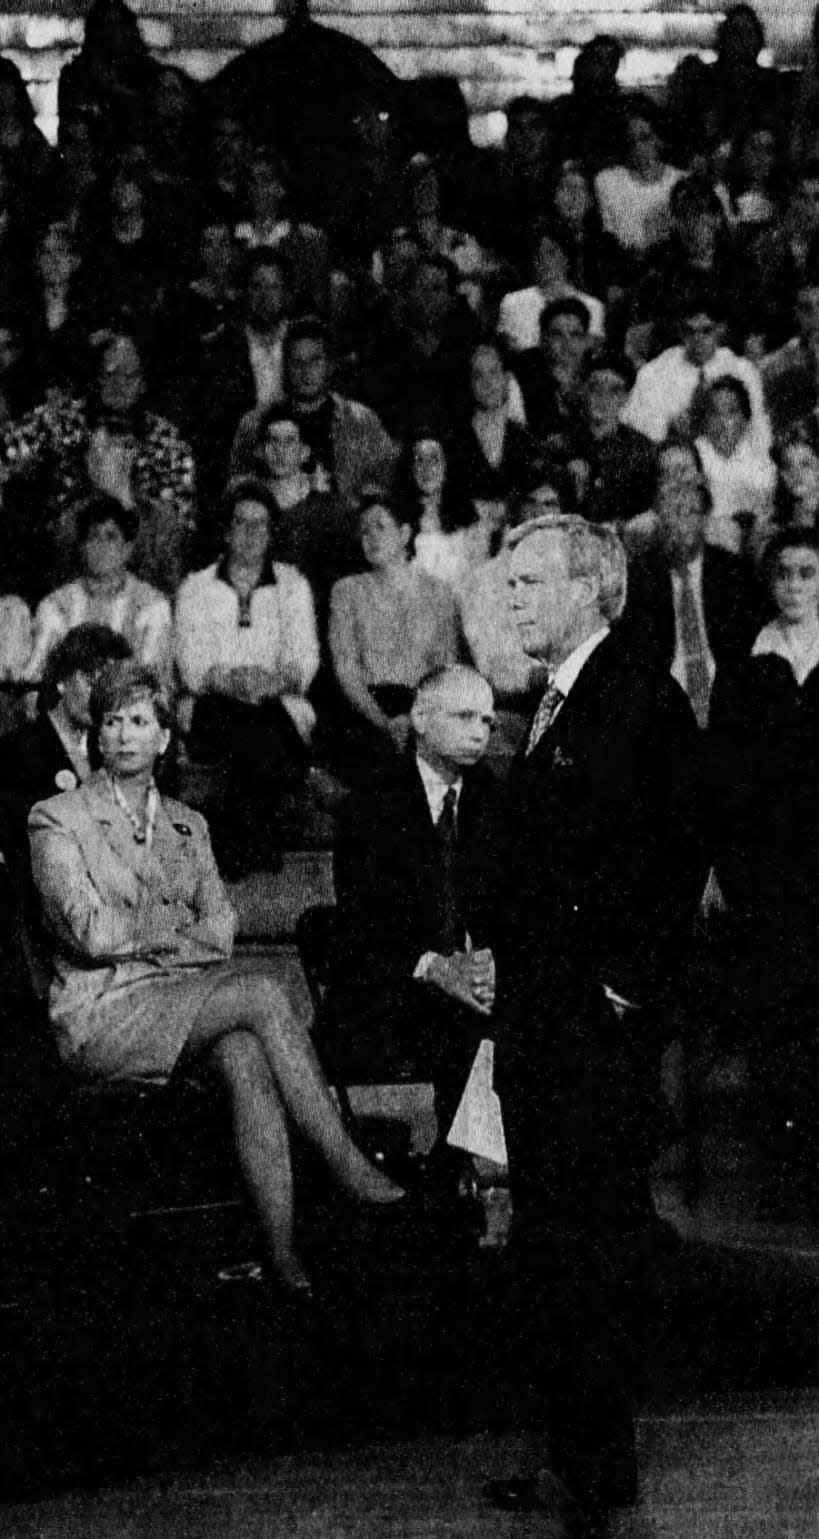 NBC news anchor Tom Brokaw addressed Westfield High School students and Gov. Christie Whitman during a town meeting on Wednesday, April 28, 1999, at the high school. The event focused on the Columbine High School shootings.